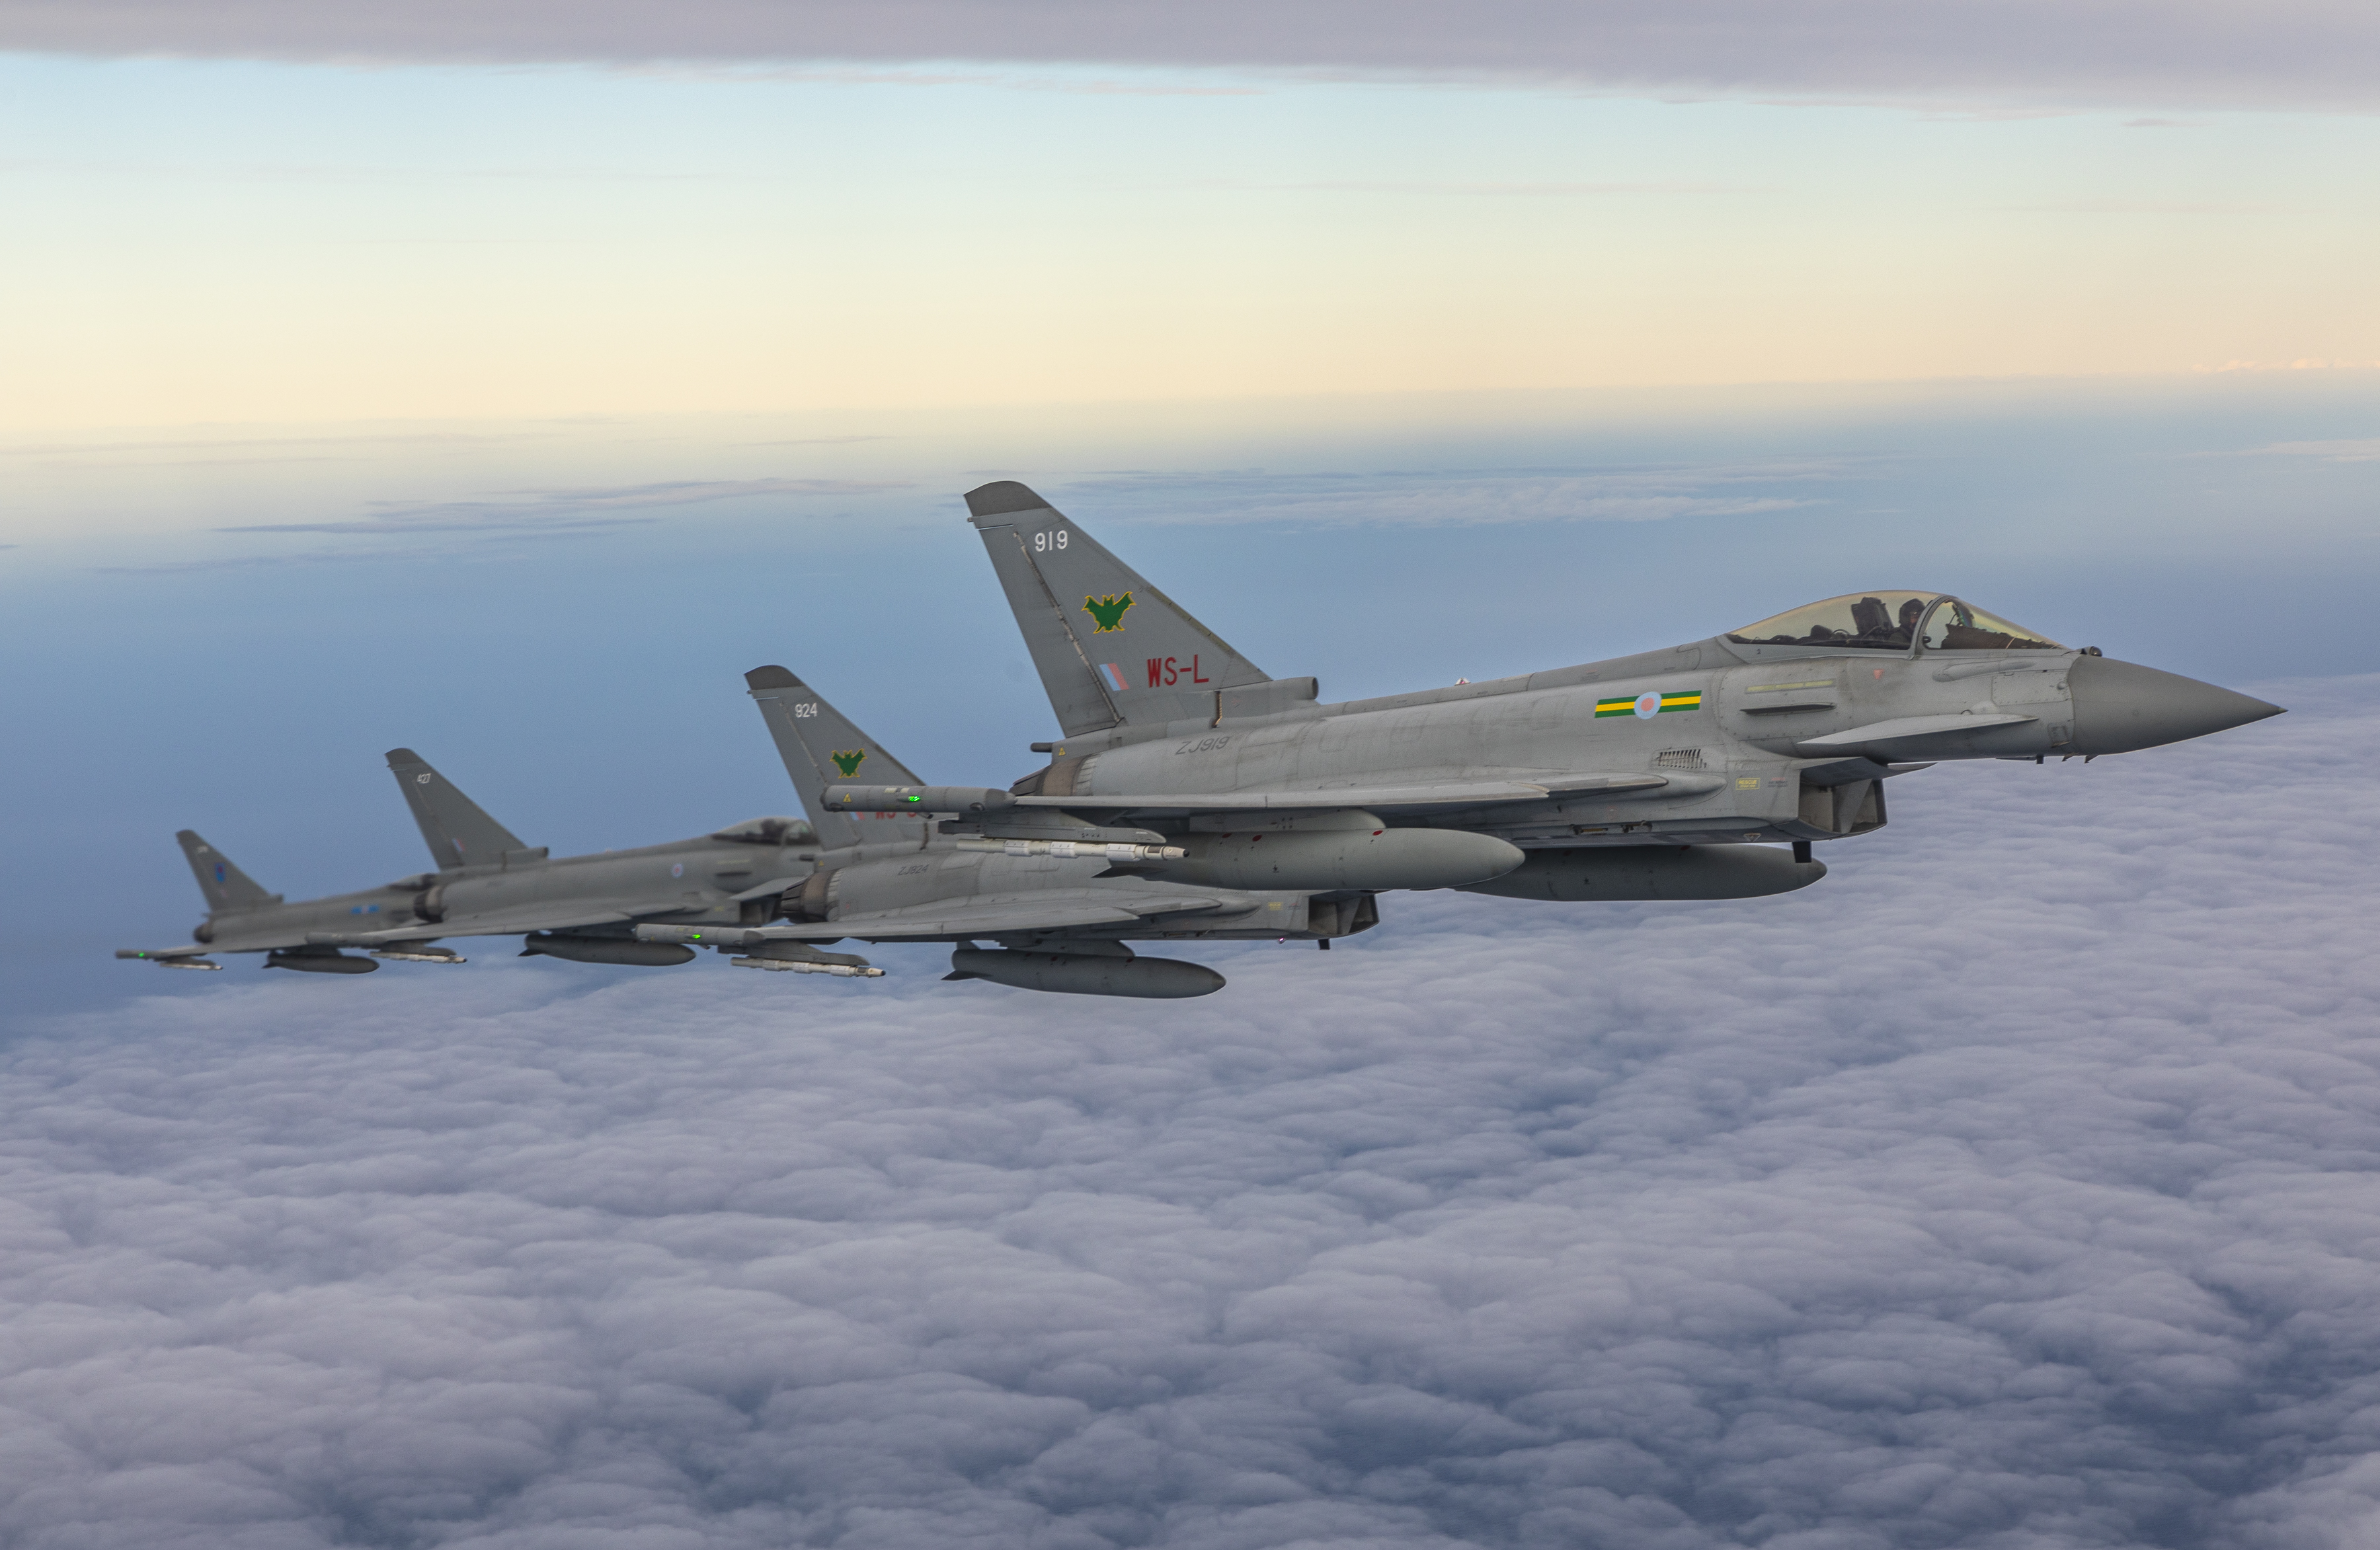 The RAF Conduct Mass Air Exercise with U.S.A.F to Conclude the Bomber Task Force Season